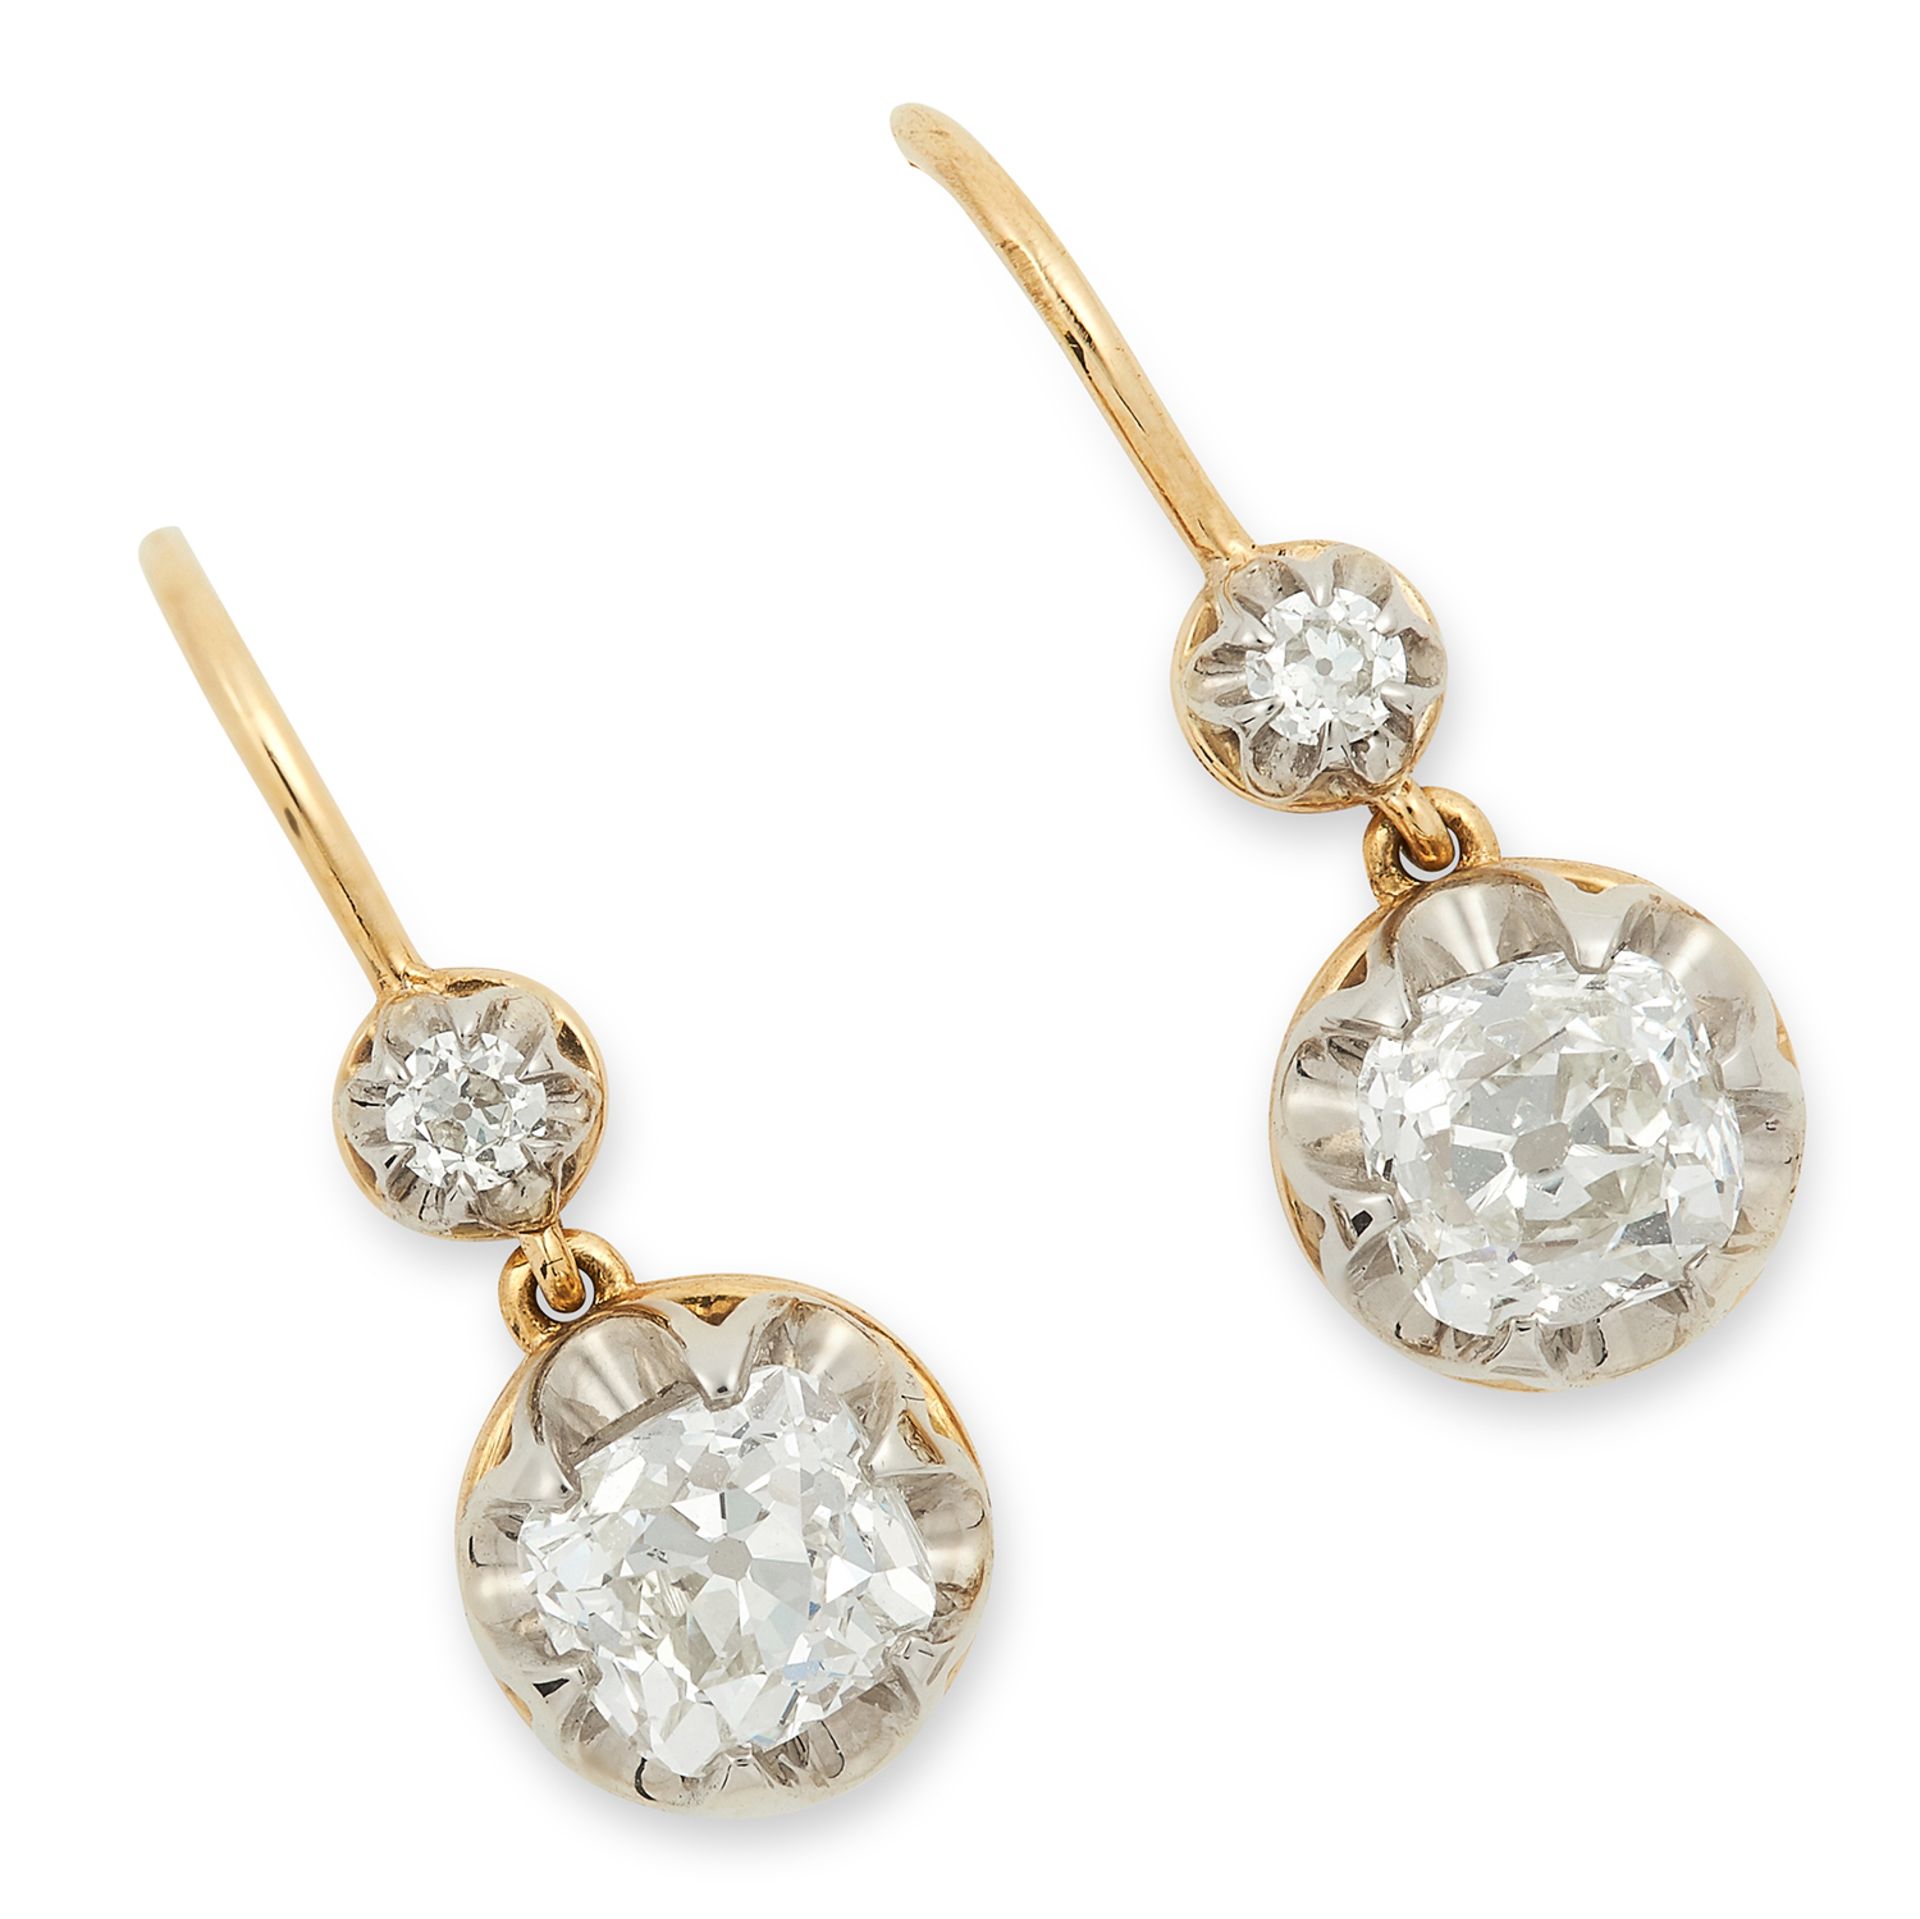 2.06 CARAT DIAMOND DROP EARRINGS each set with two old cut diamonds totalling approximately 2.06